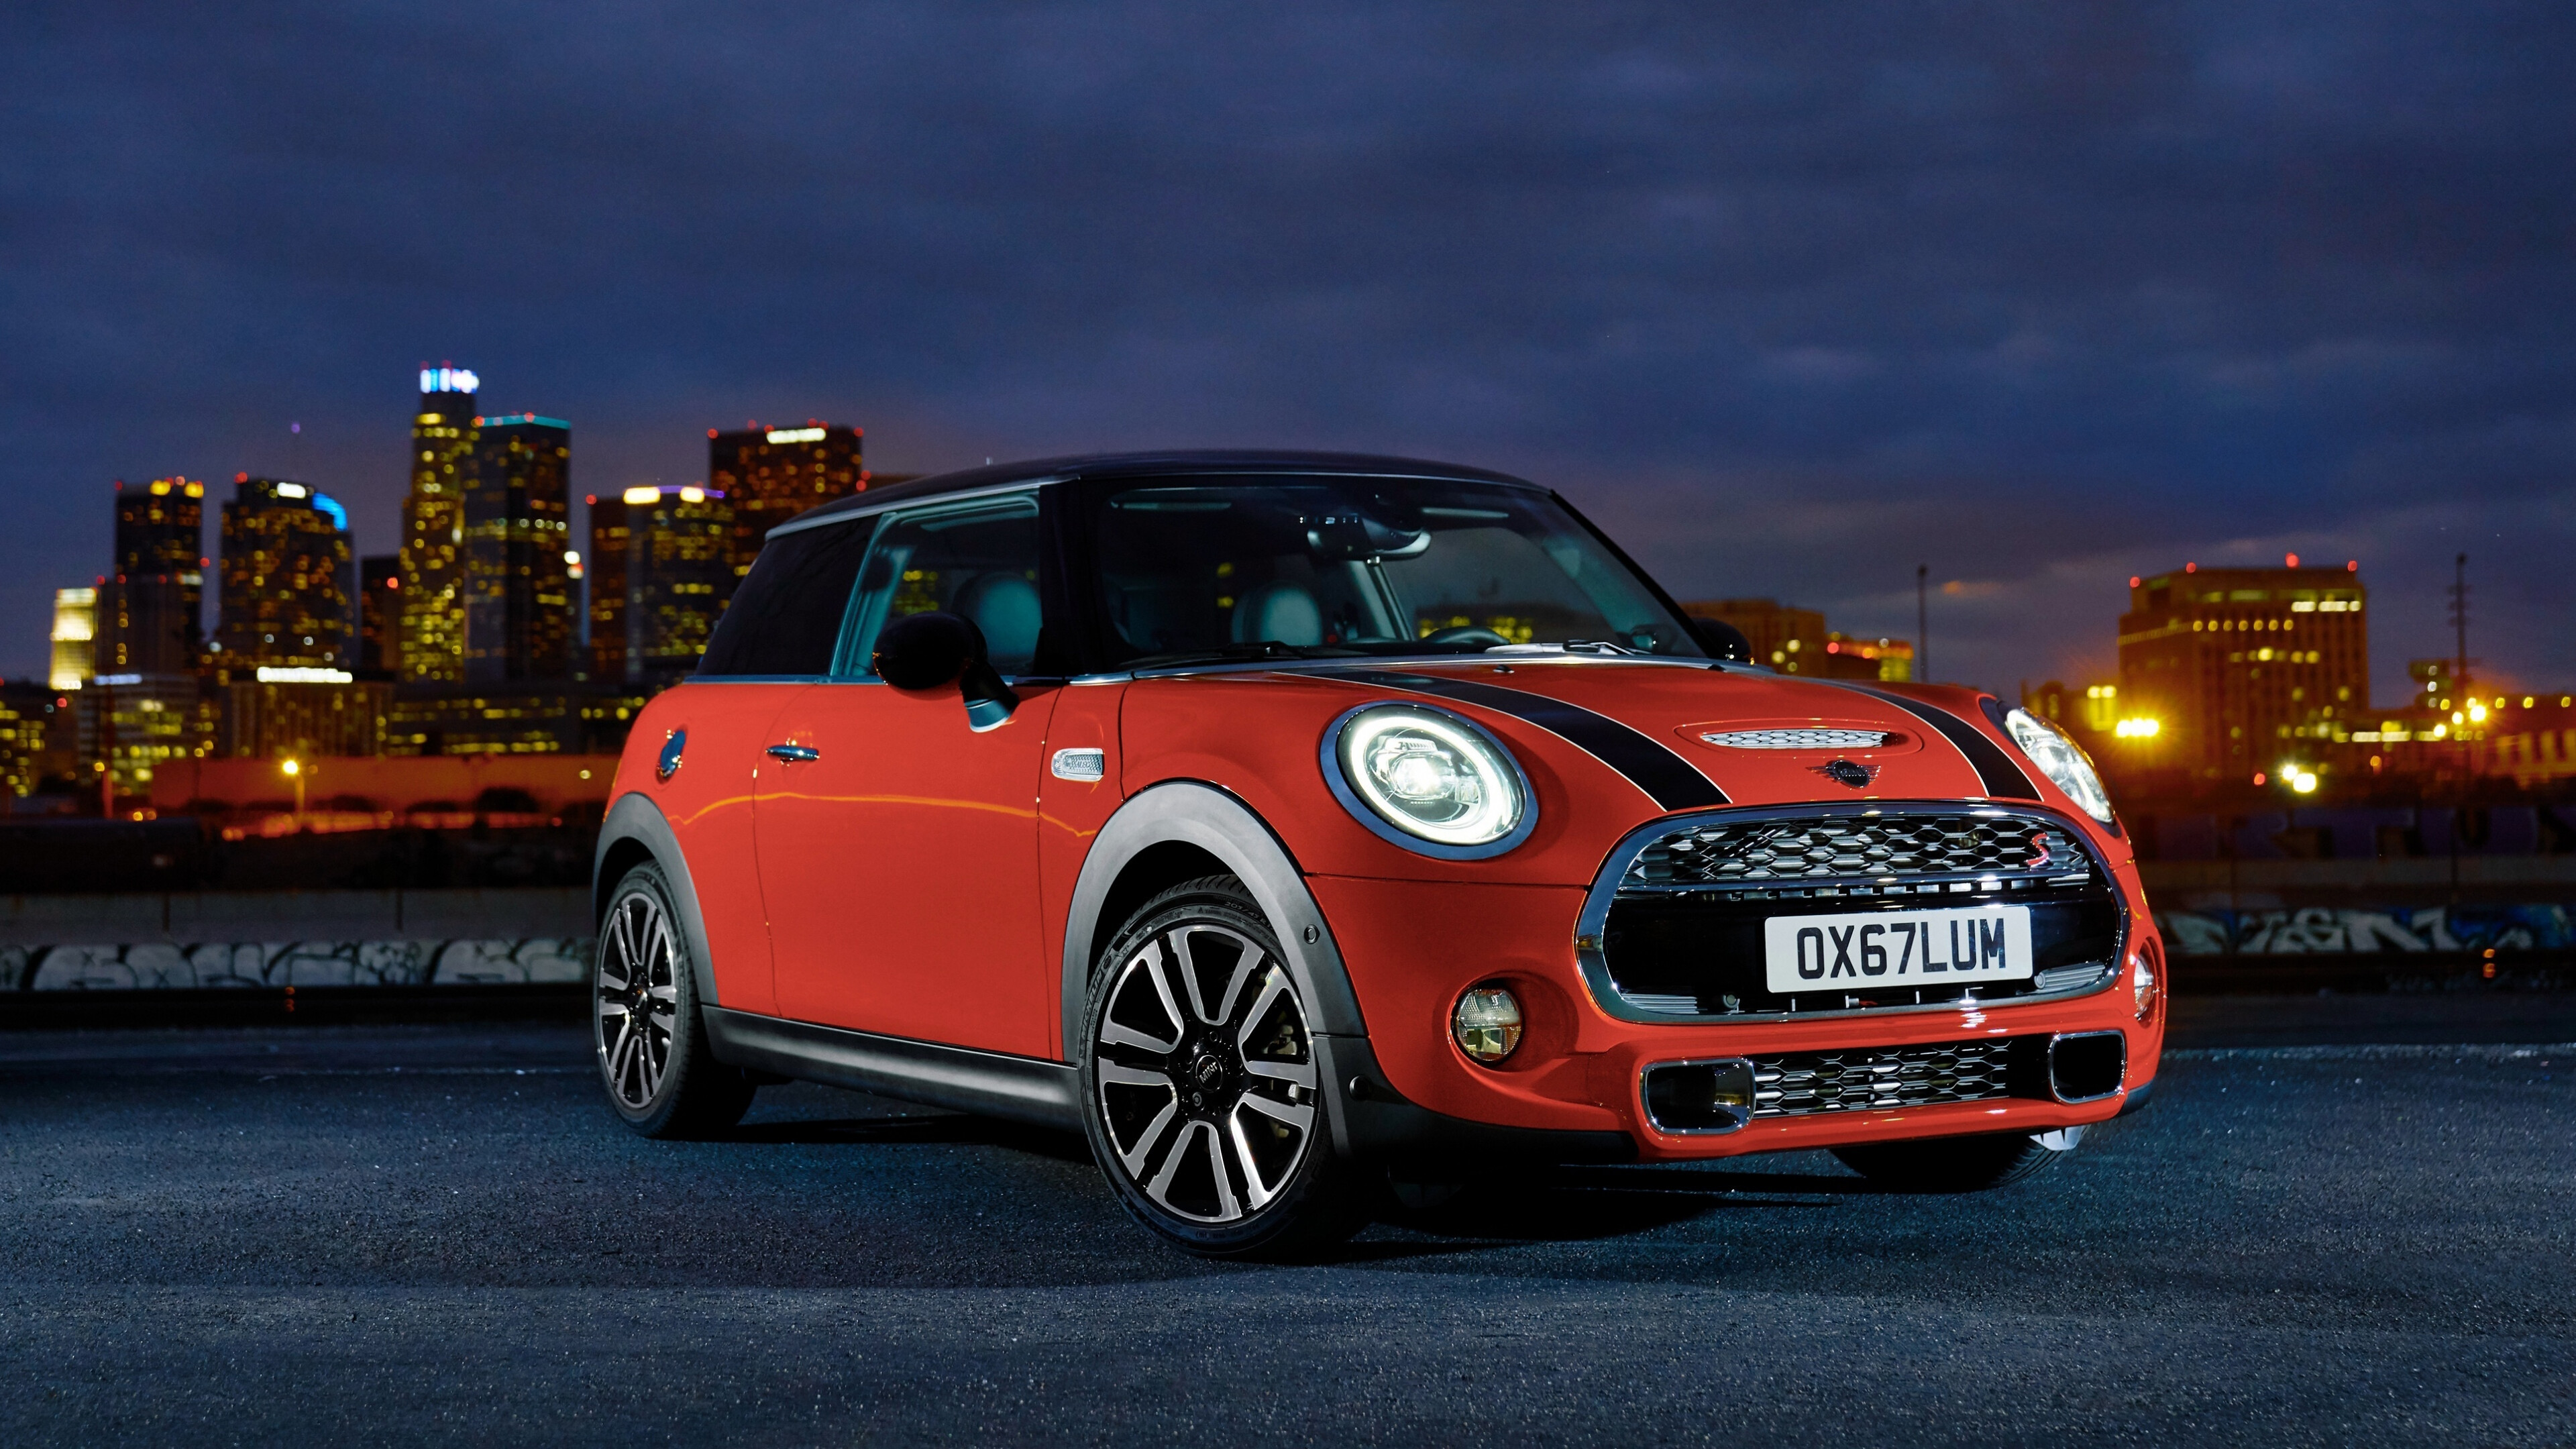 MINI Cooper: Model S, Compact car, Became a marque in its own right in 1969. 3840x2160 4K Background.